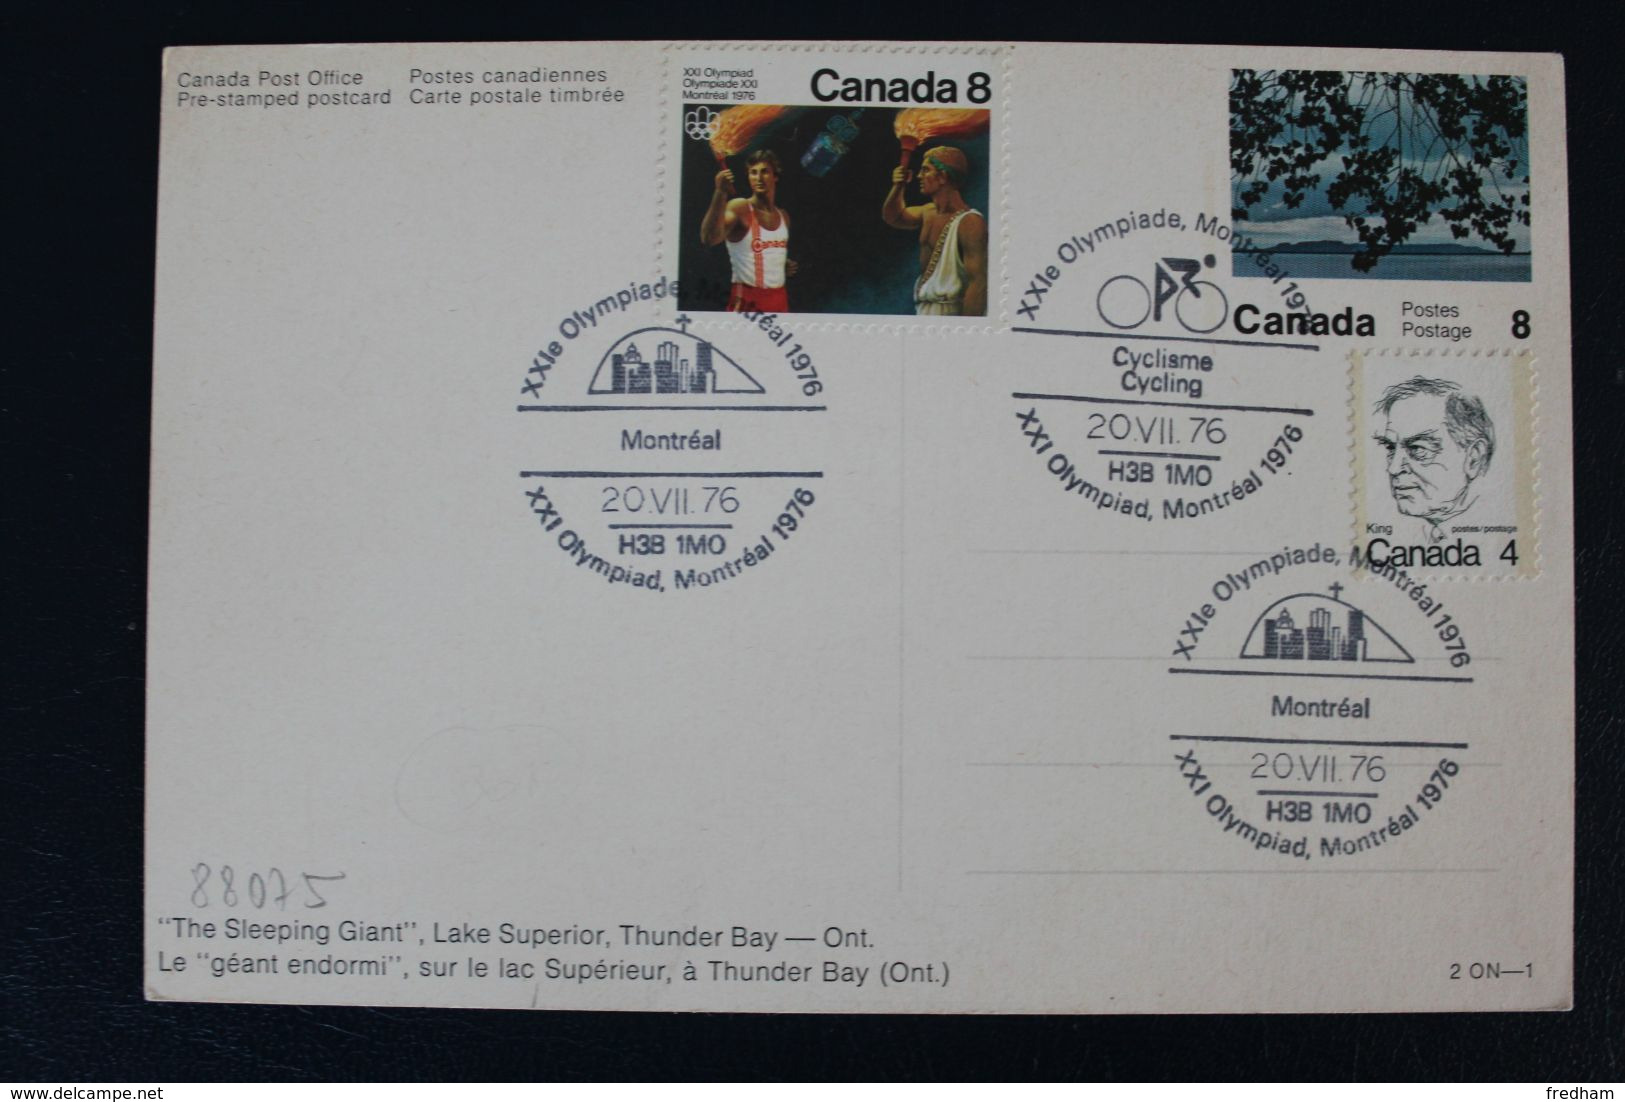 CANADA 1976 CARTE POSTALE ILLUSTREE XXIe OLYMPIADES MONTREAL DIFFERENTS CACHETS COMMEMORATIFS - Post Office Cards